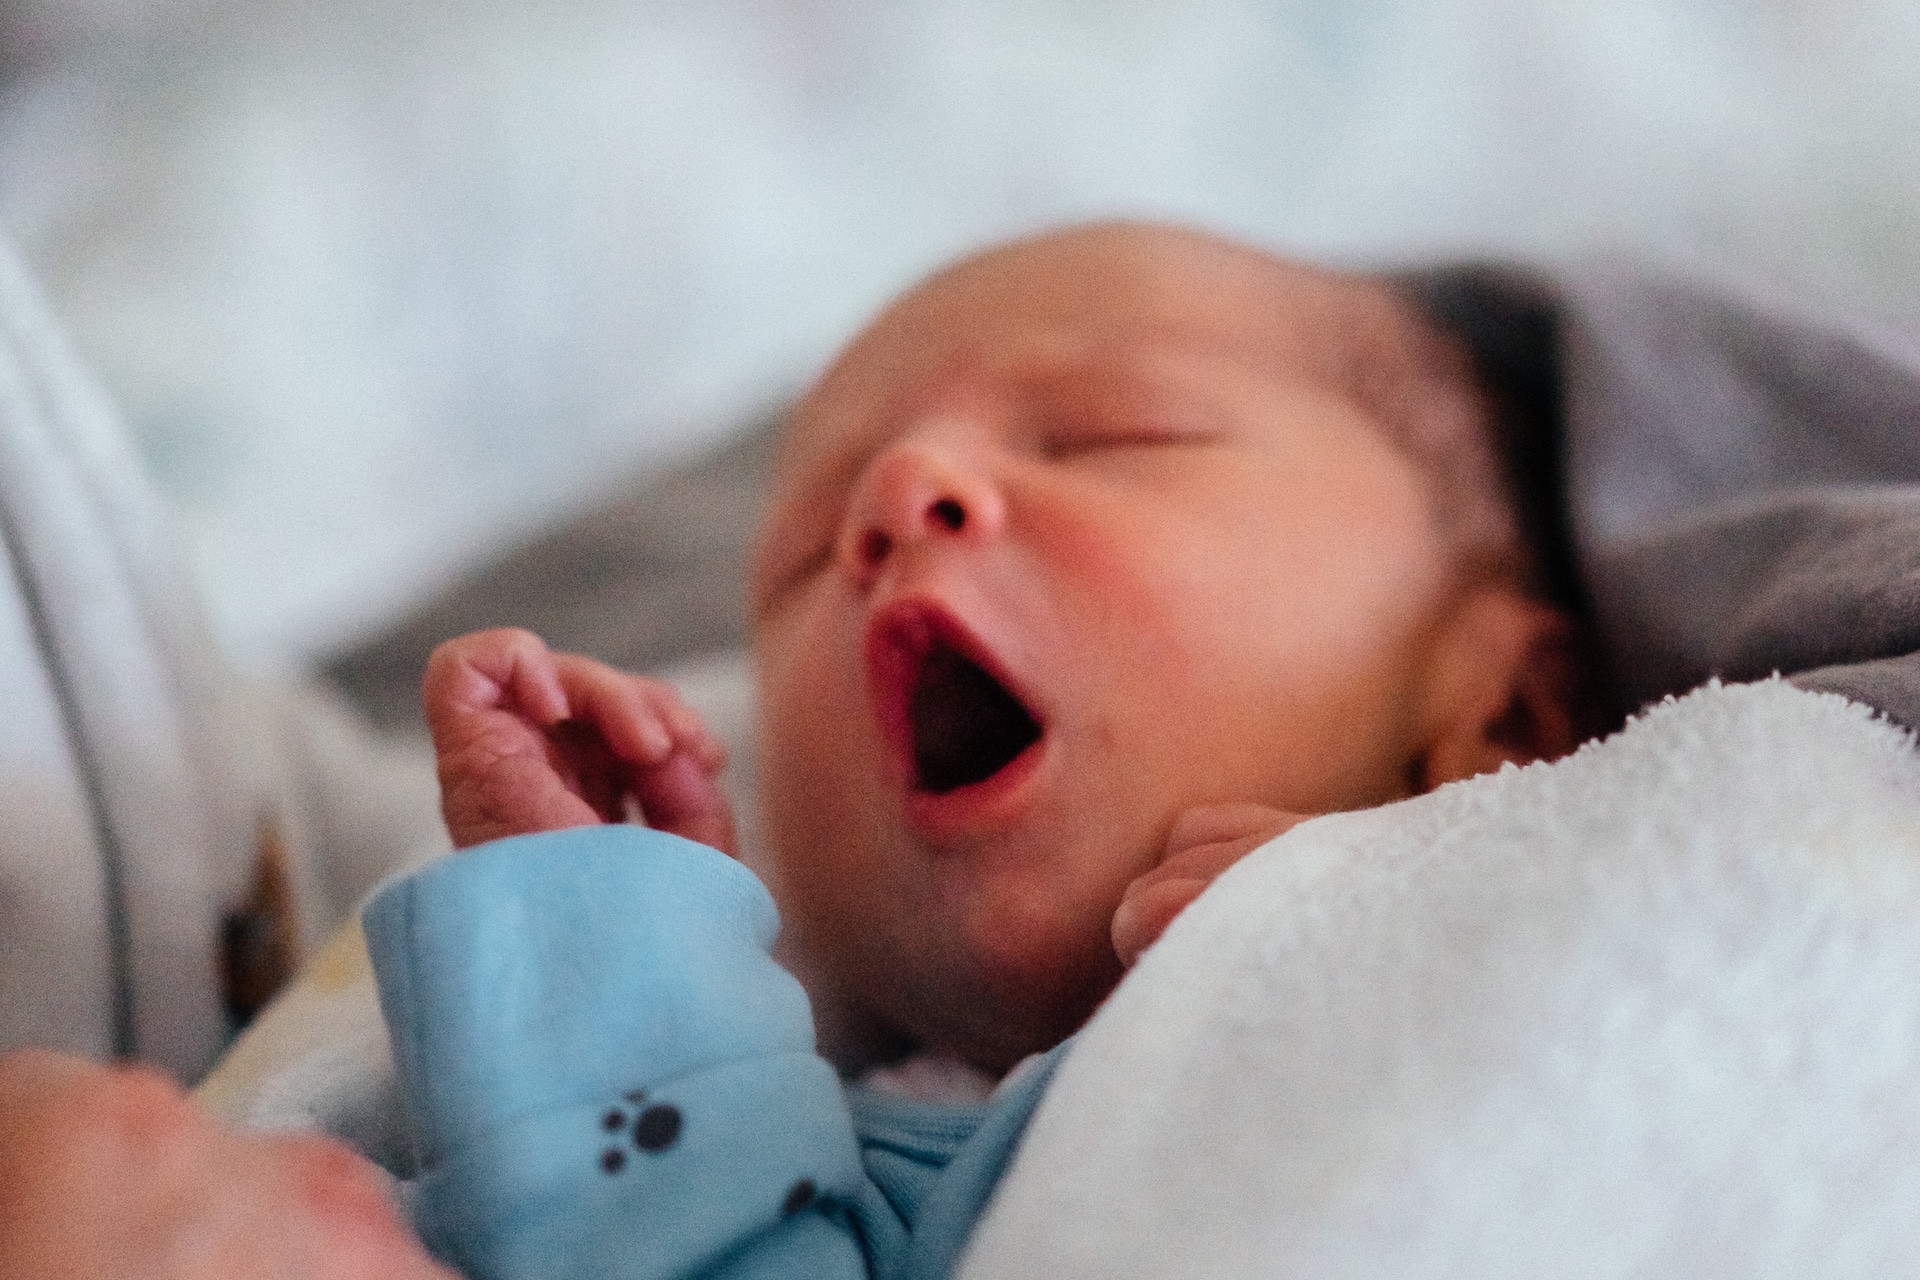 newborn baby yawing while being held